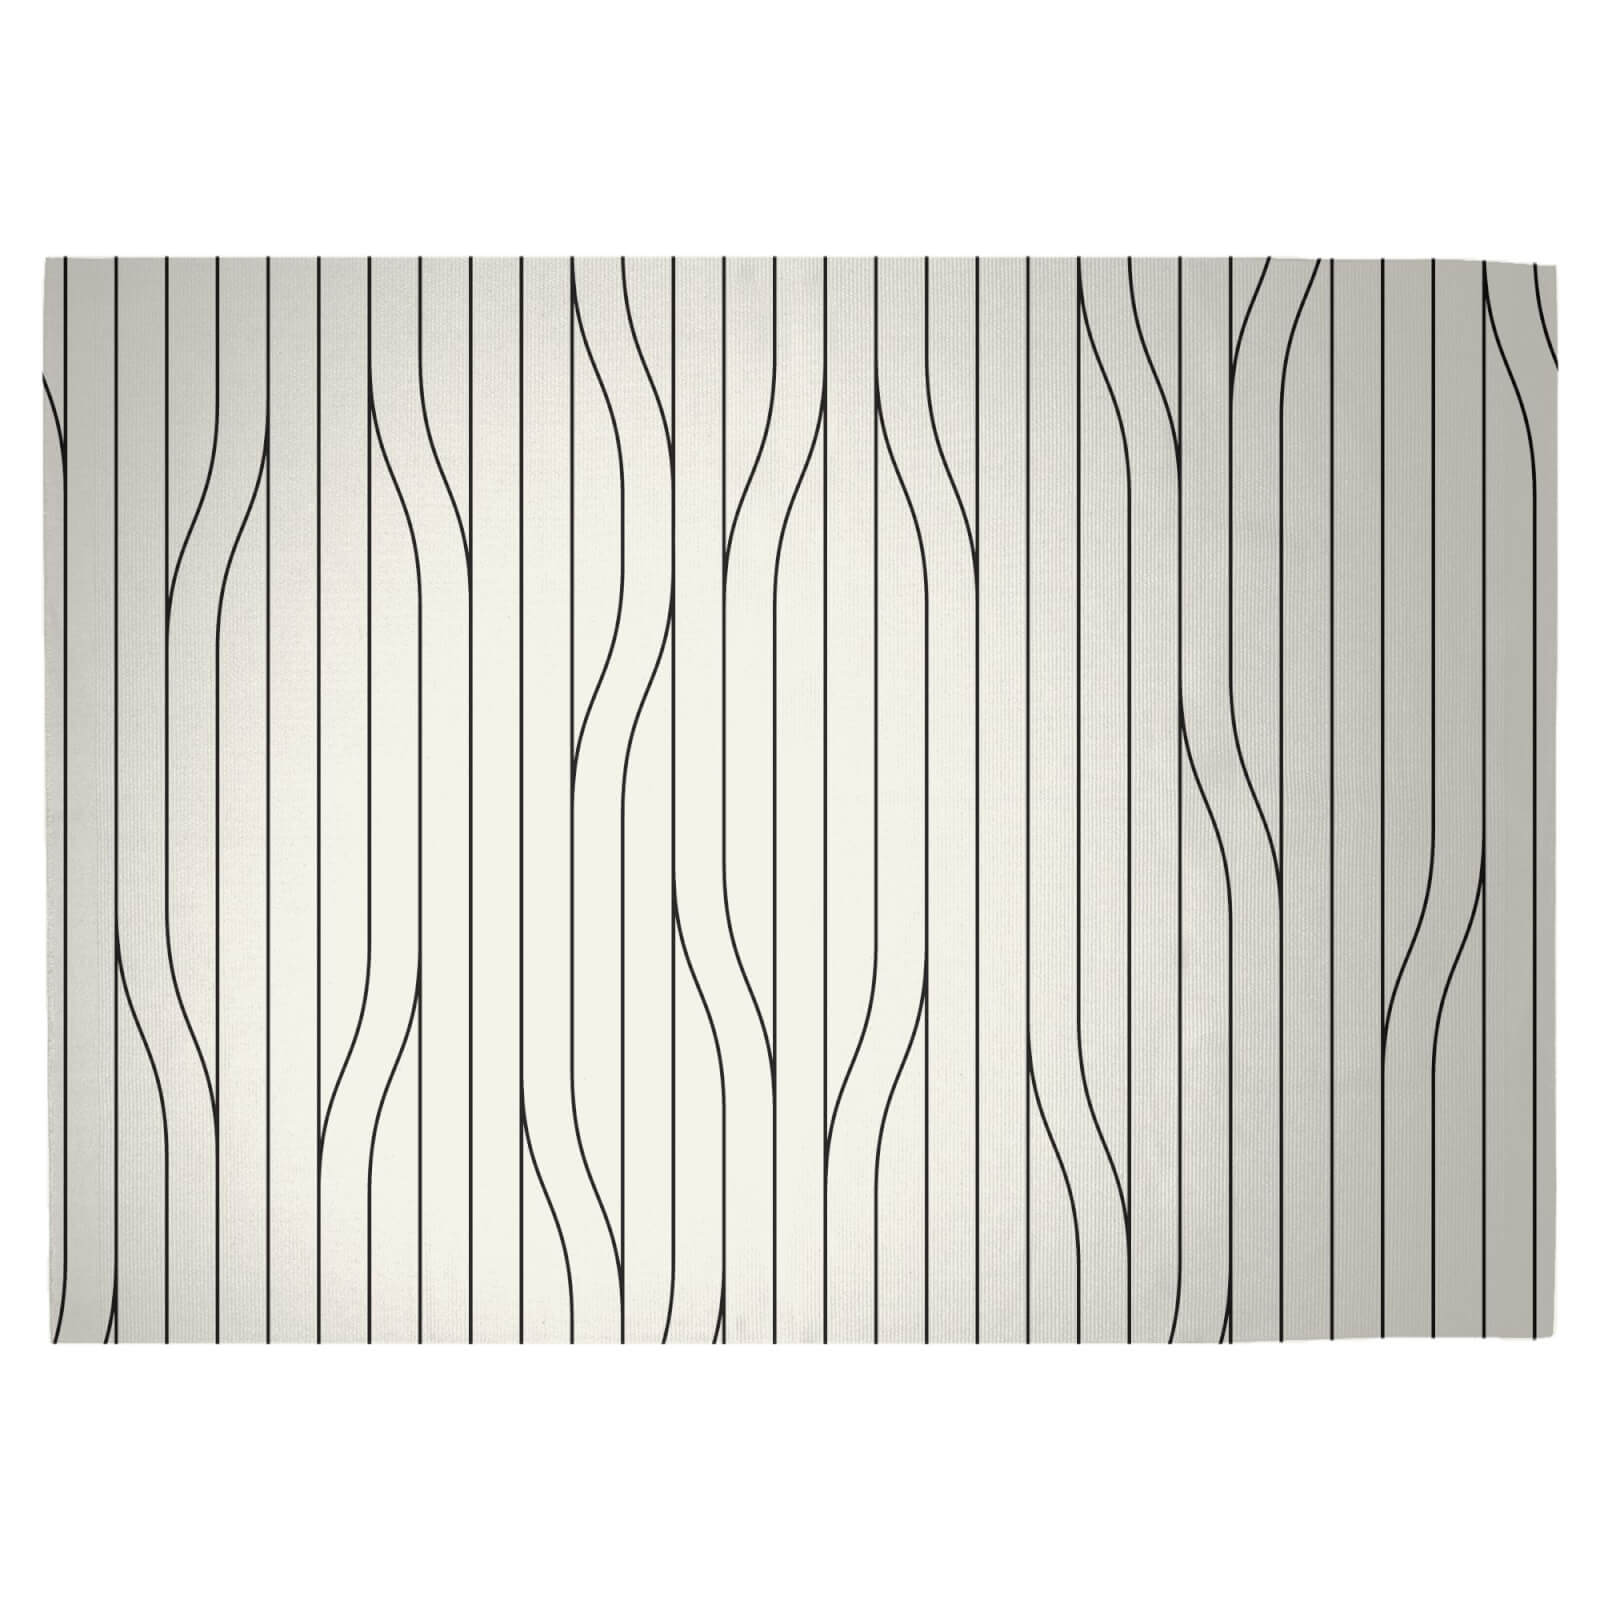 Thin Warped Lines Woven Rug - Large